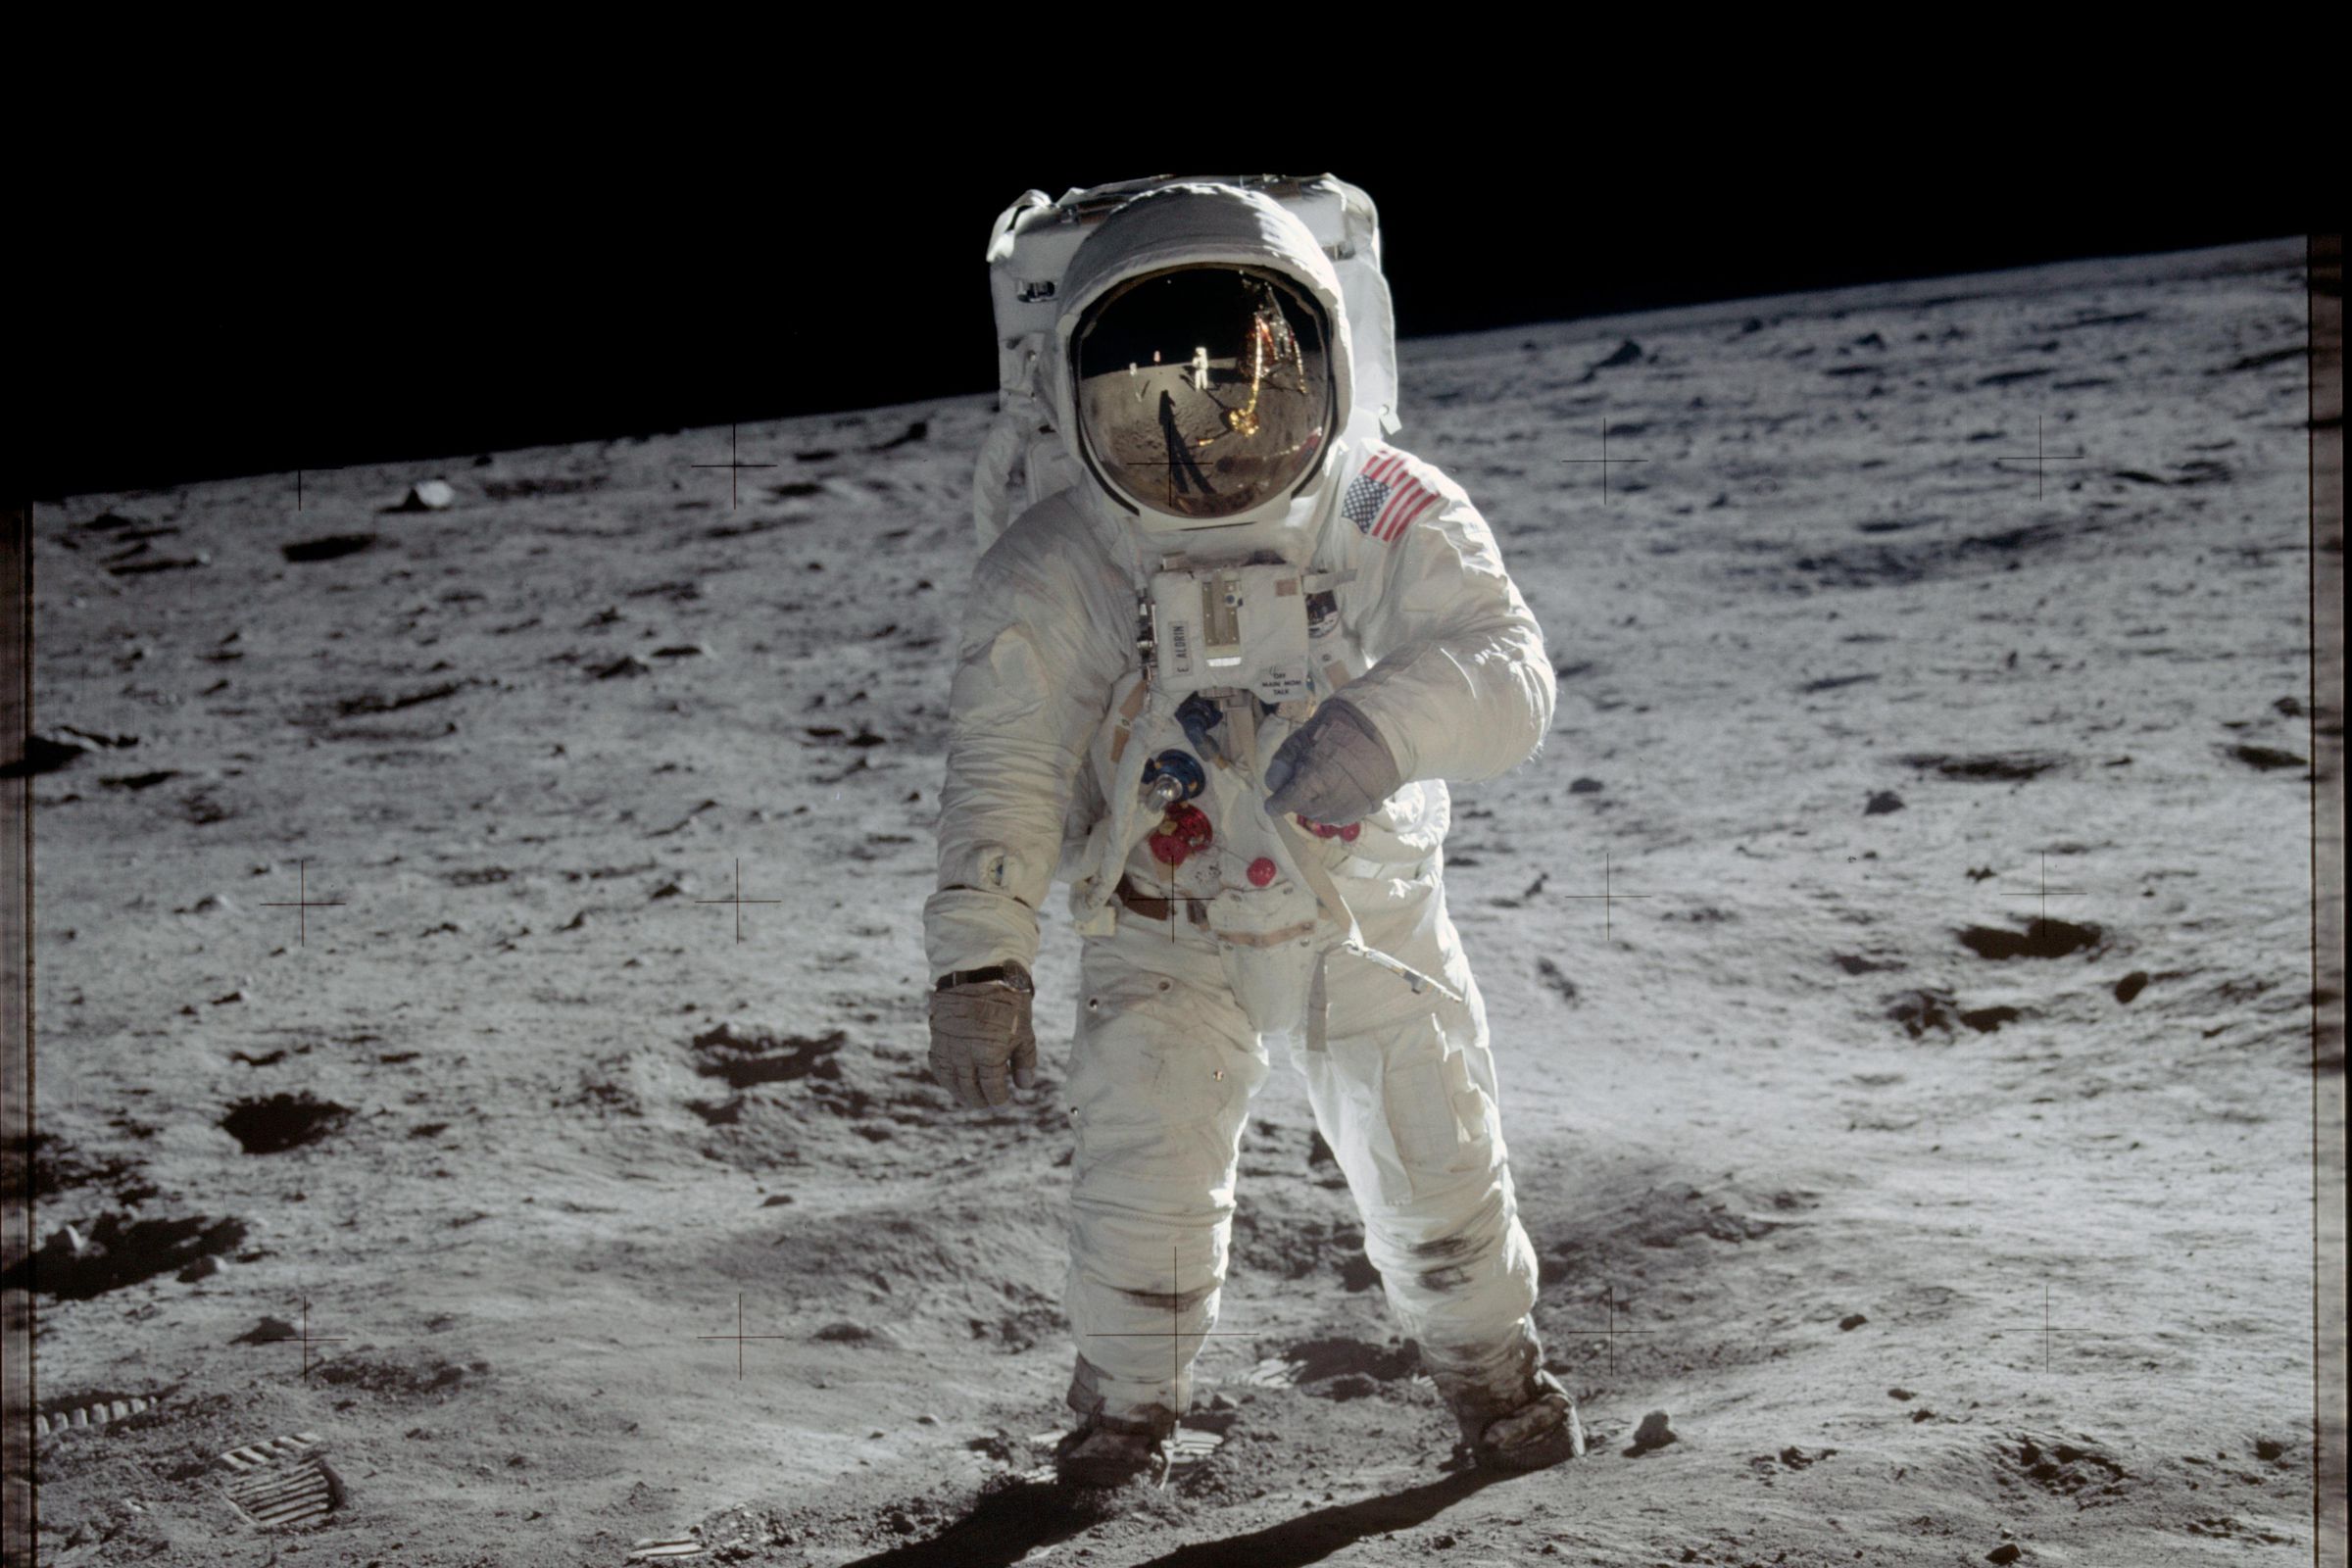 Buzz Aldrin on the surface of the Moon. Only men have ever landed on the lunar surface, but NASA wants to change that.